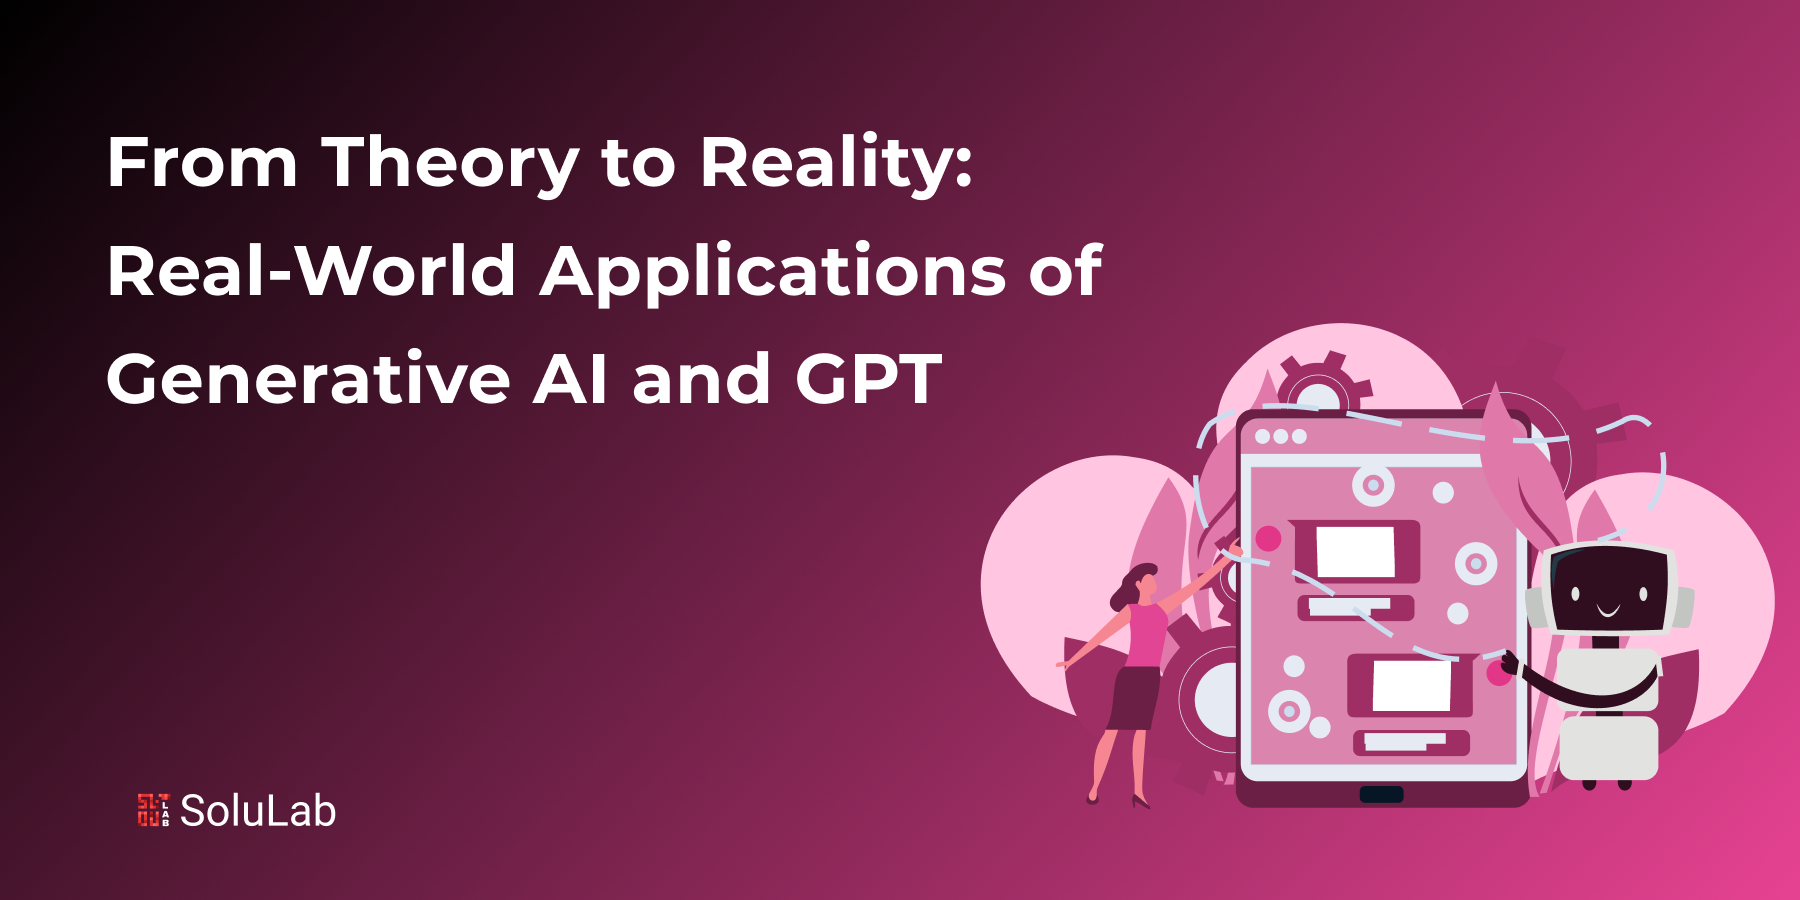 From Theory to Reality: Real-World Applications of Generative AI and GPT